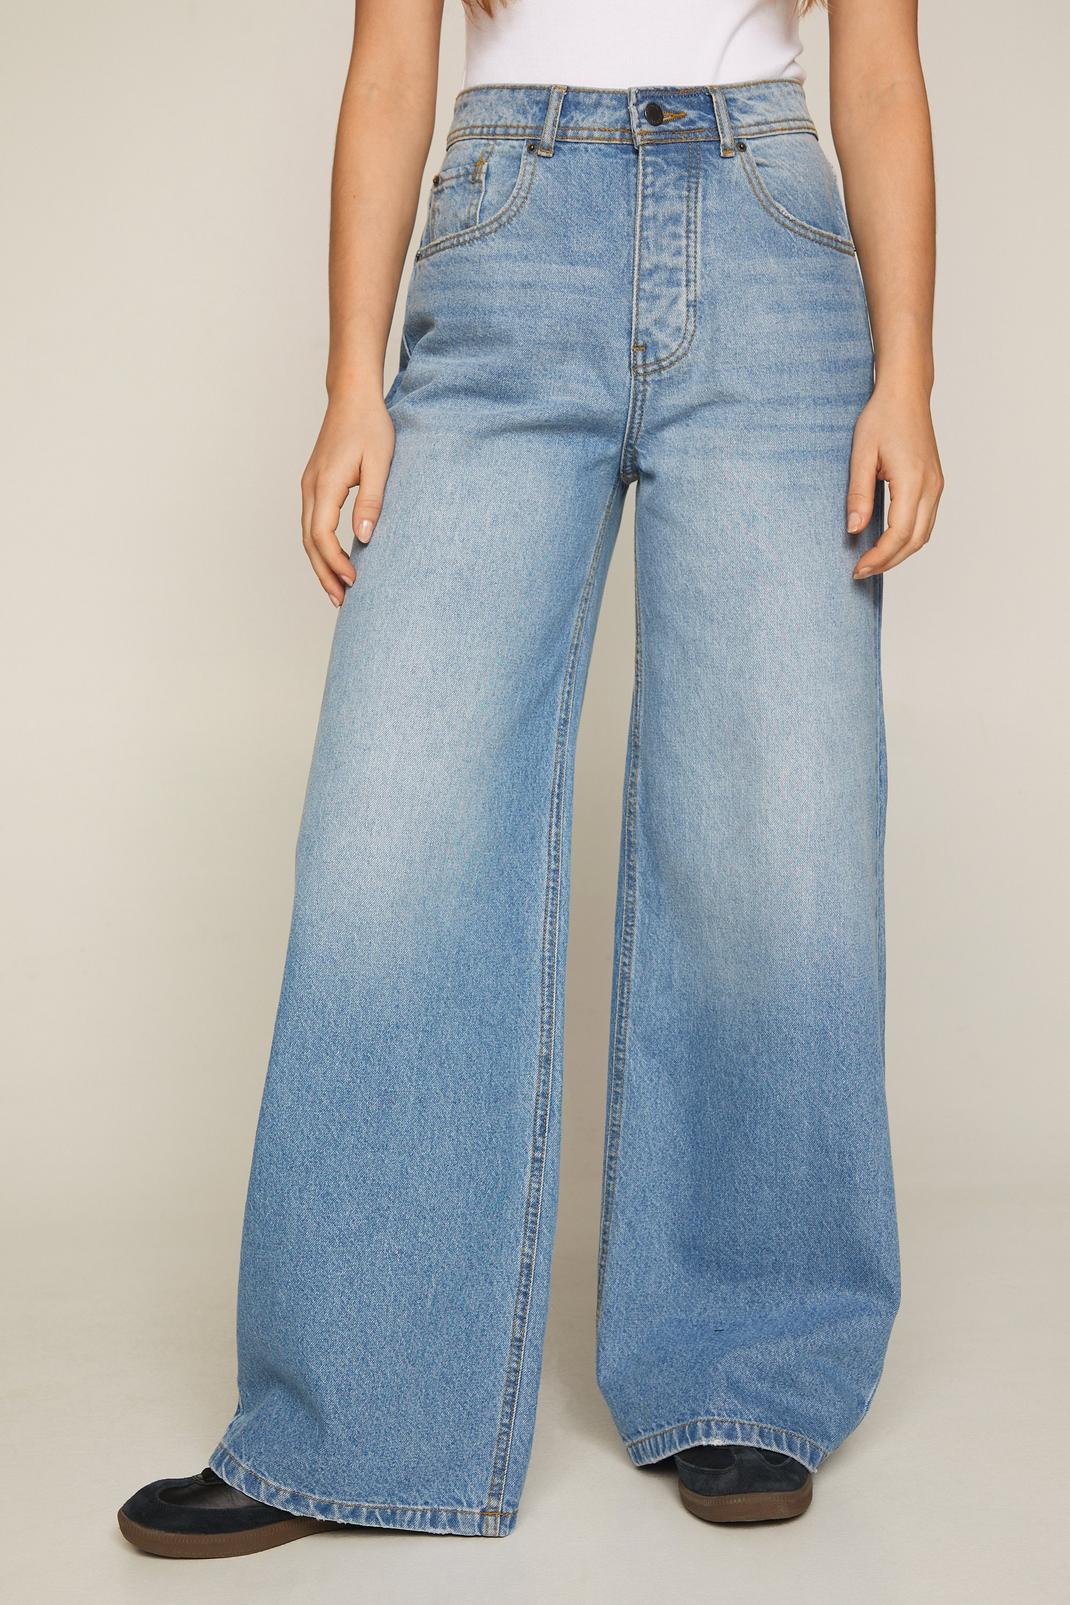 The Denim Baggy Jeans | Nasty Gal